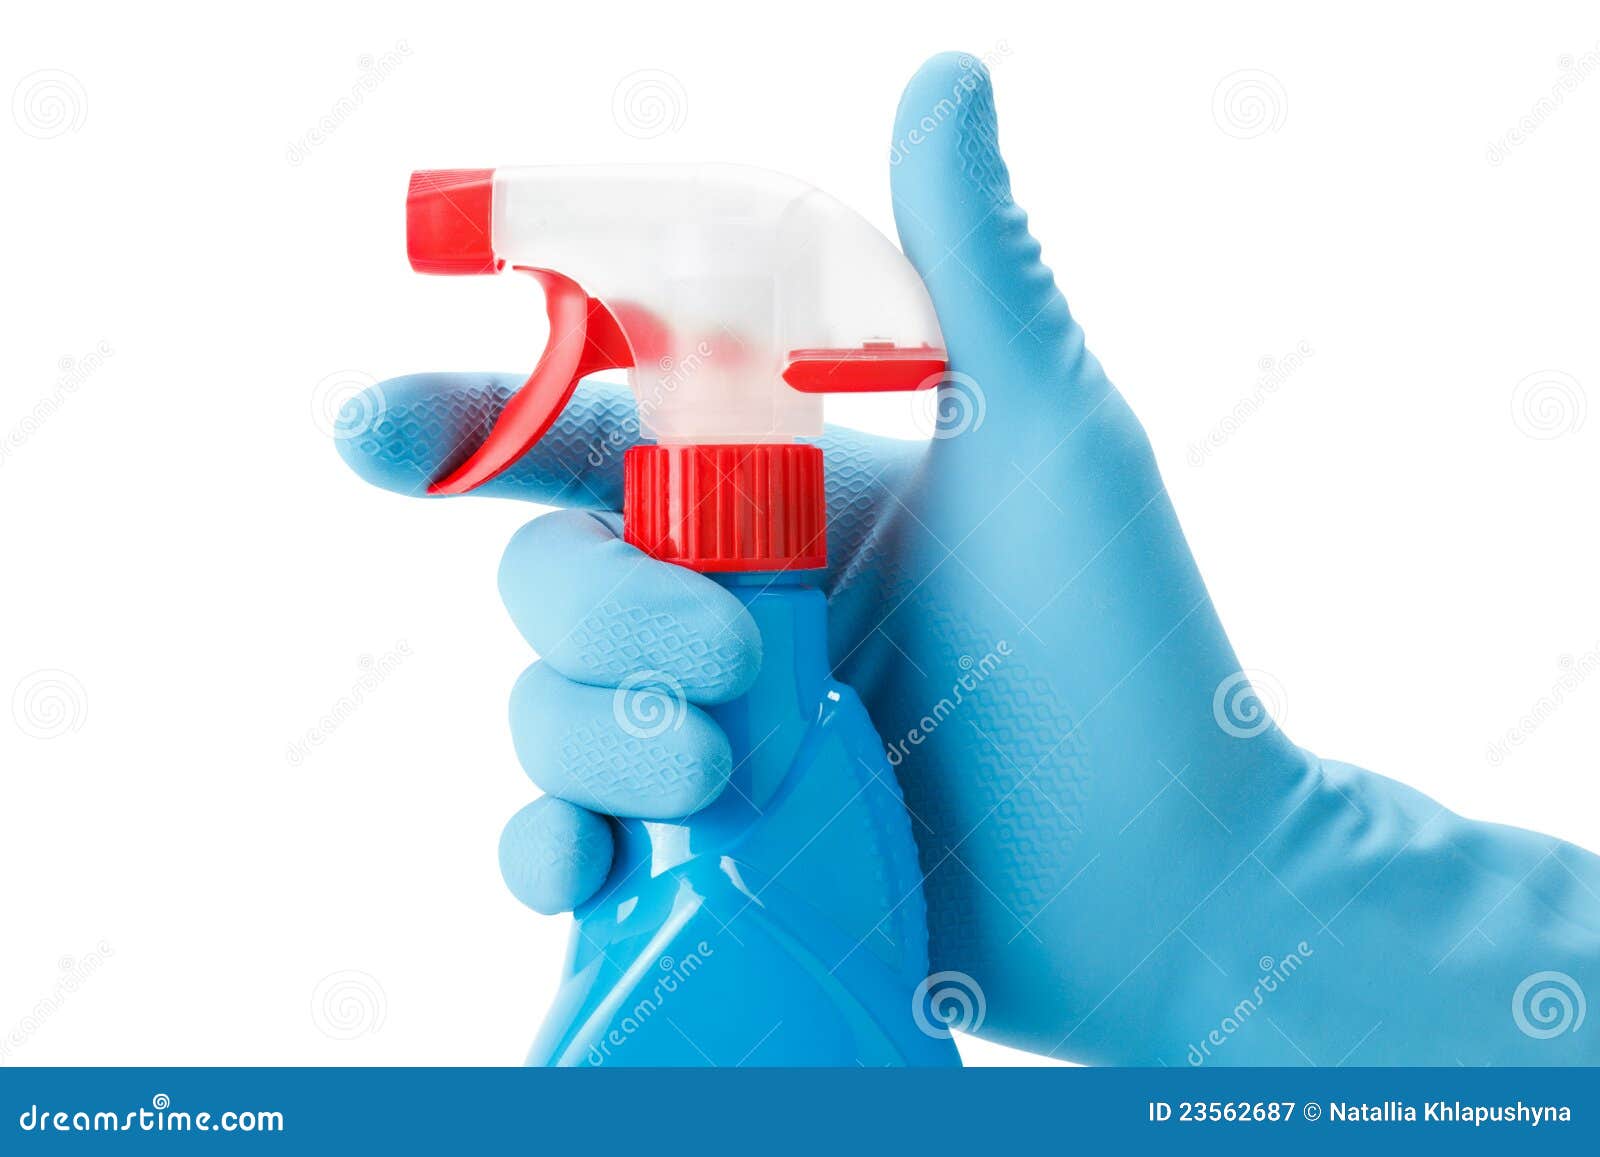 blue gloved hand with cleaning spray bottle